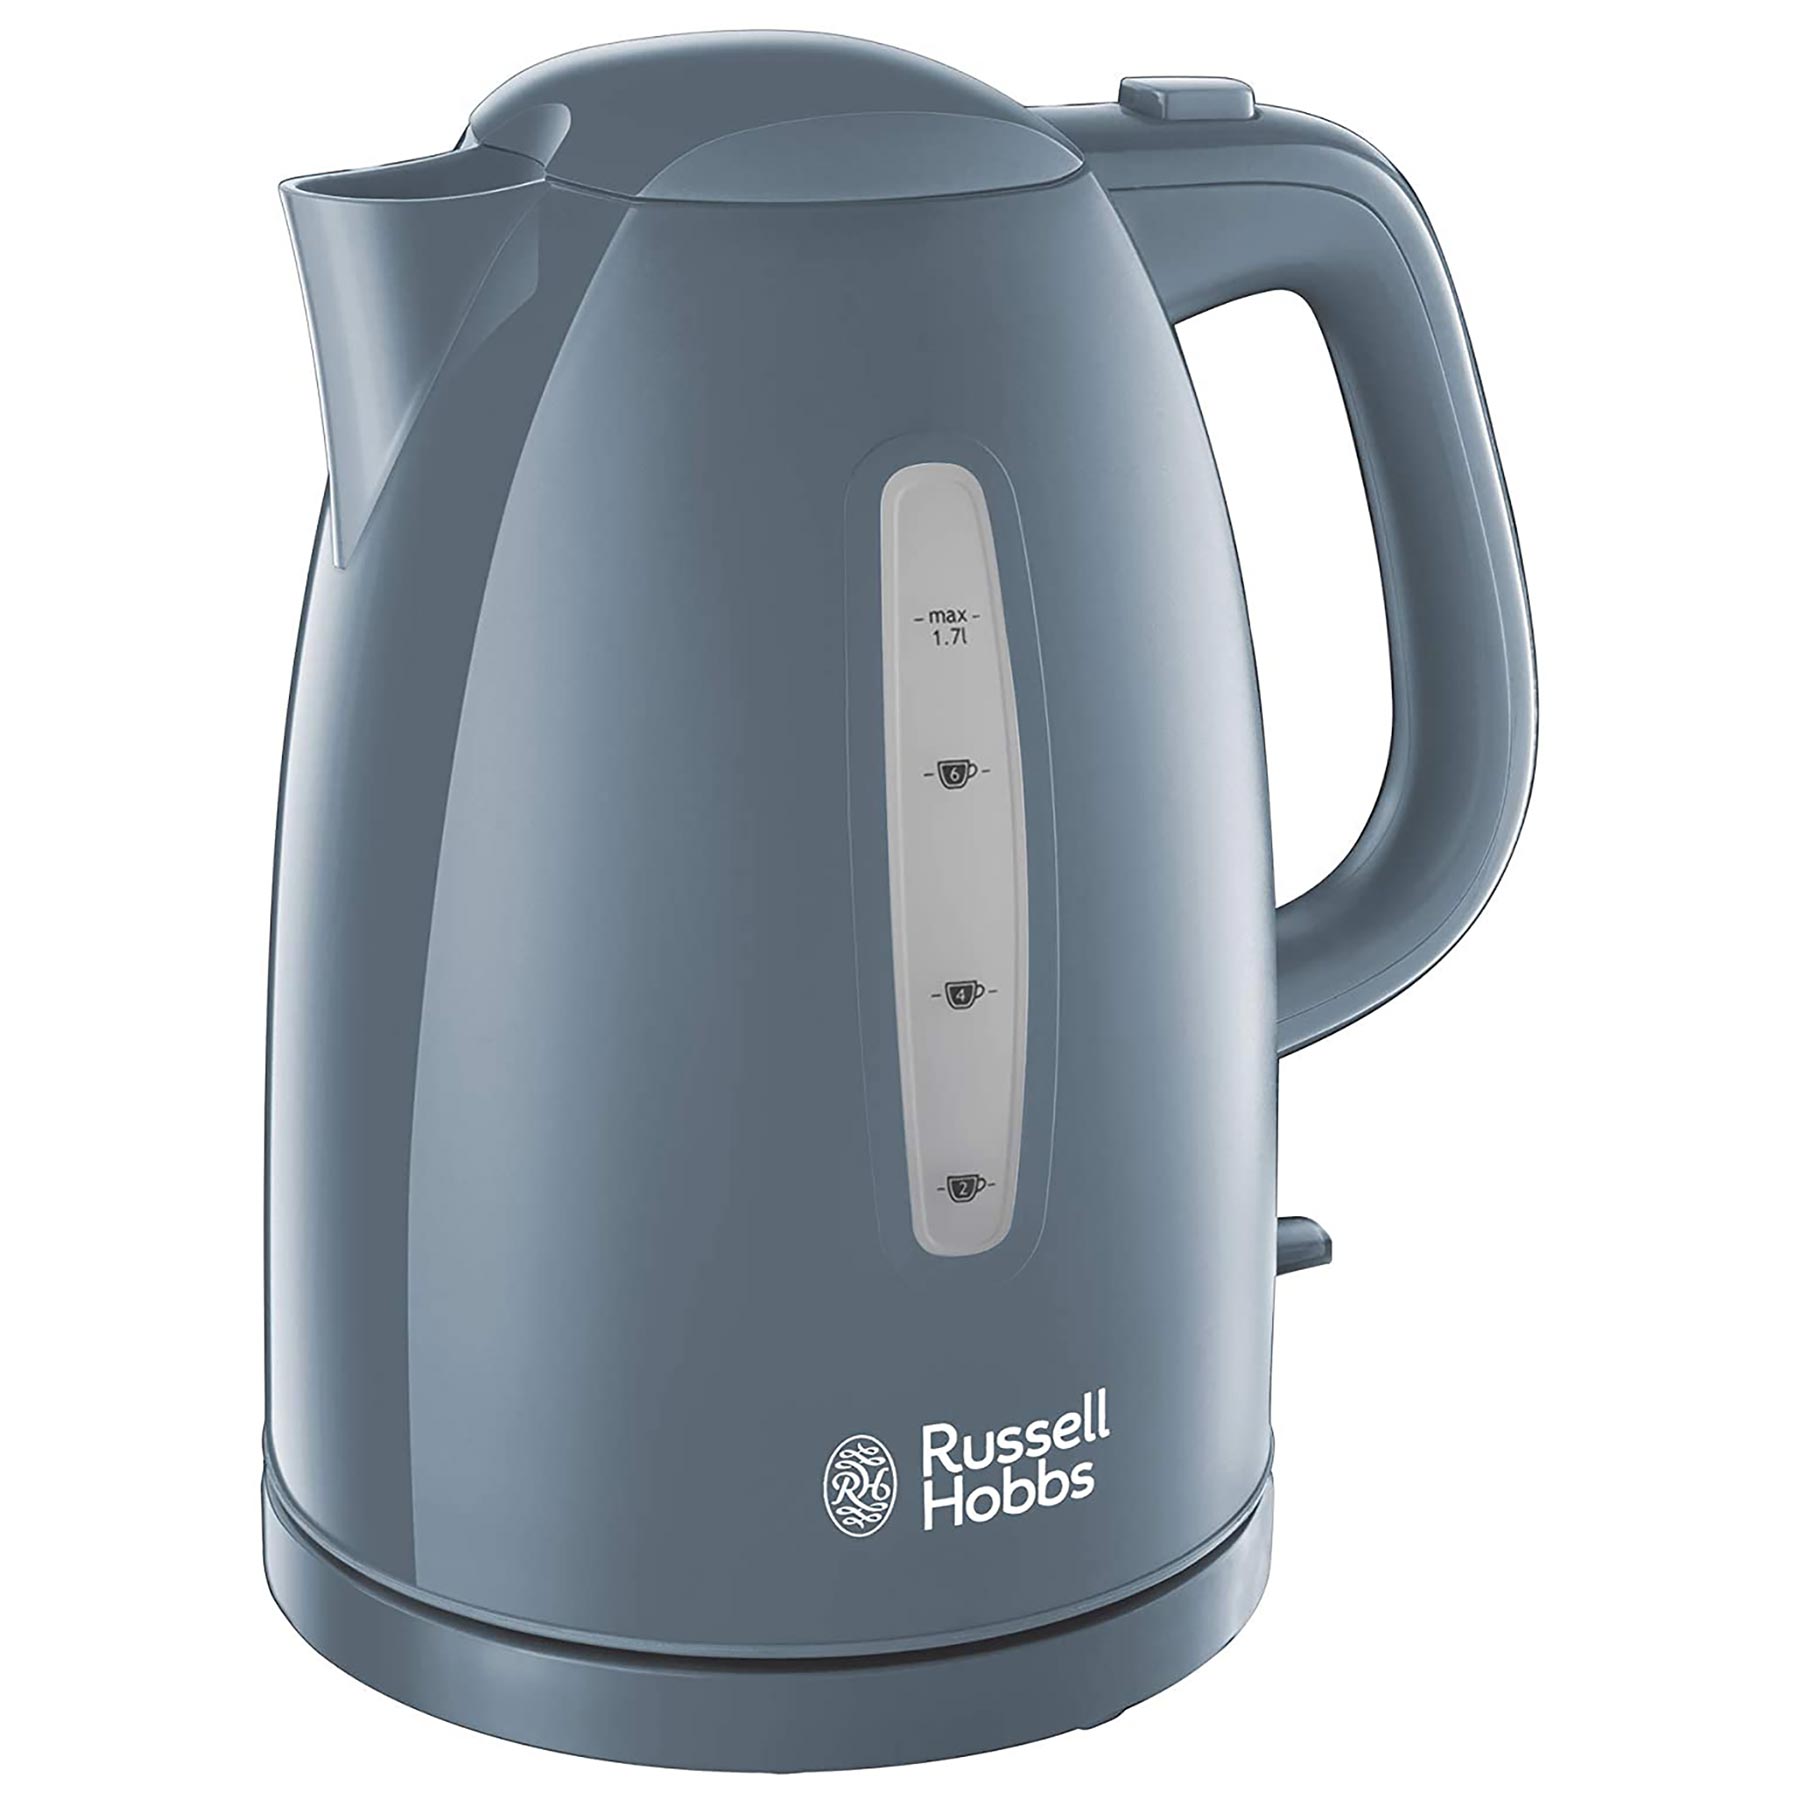 Image of Russell Hobbs 21274 Textures Cordless Kettle in Grey 1 7L 3kW